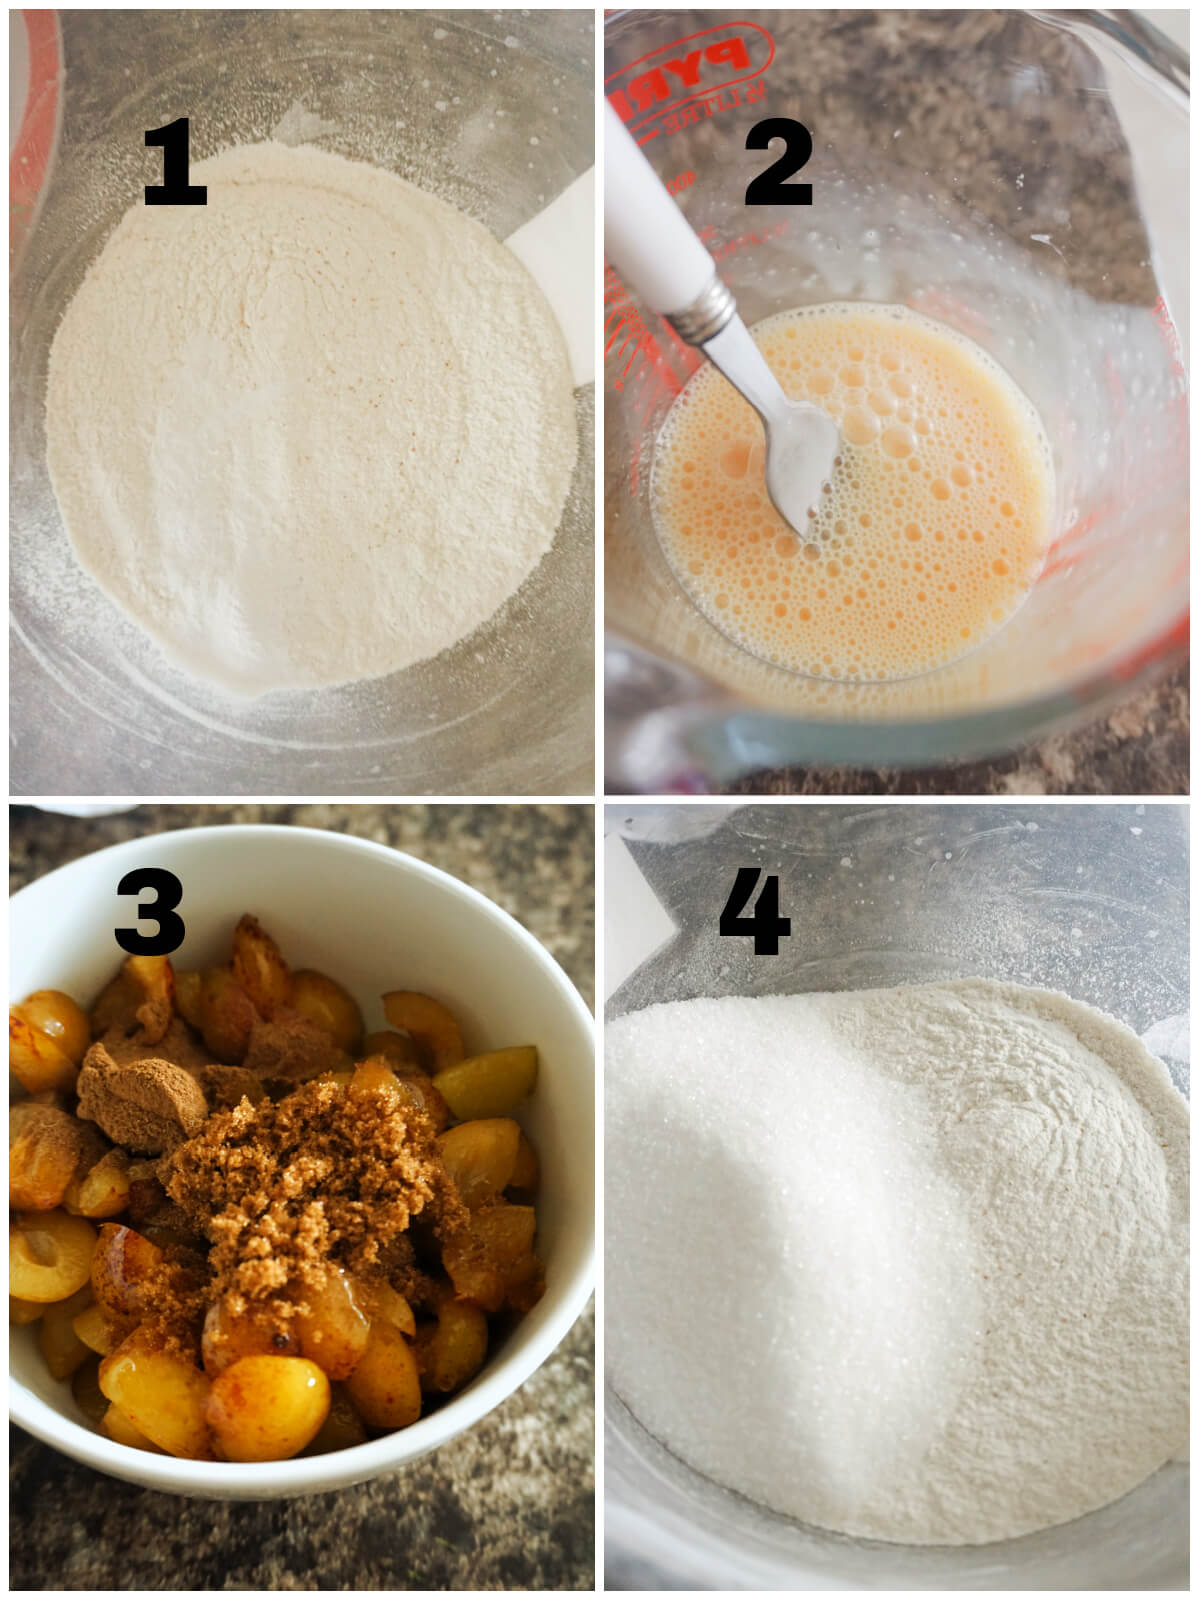 Collage of 4 photos to show how to make plum muffins.